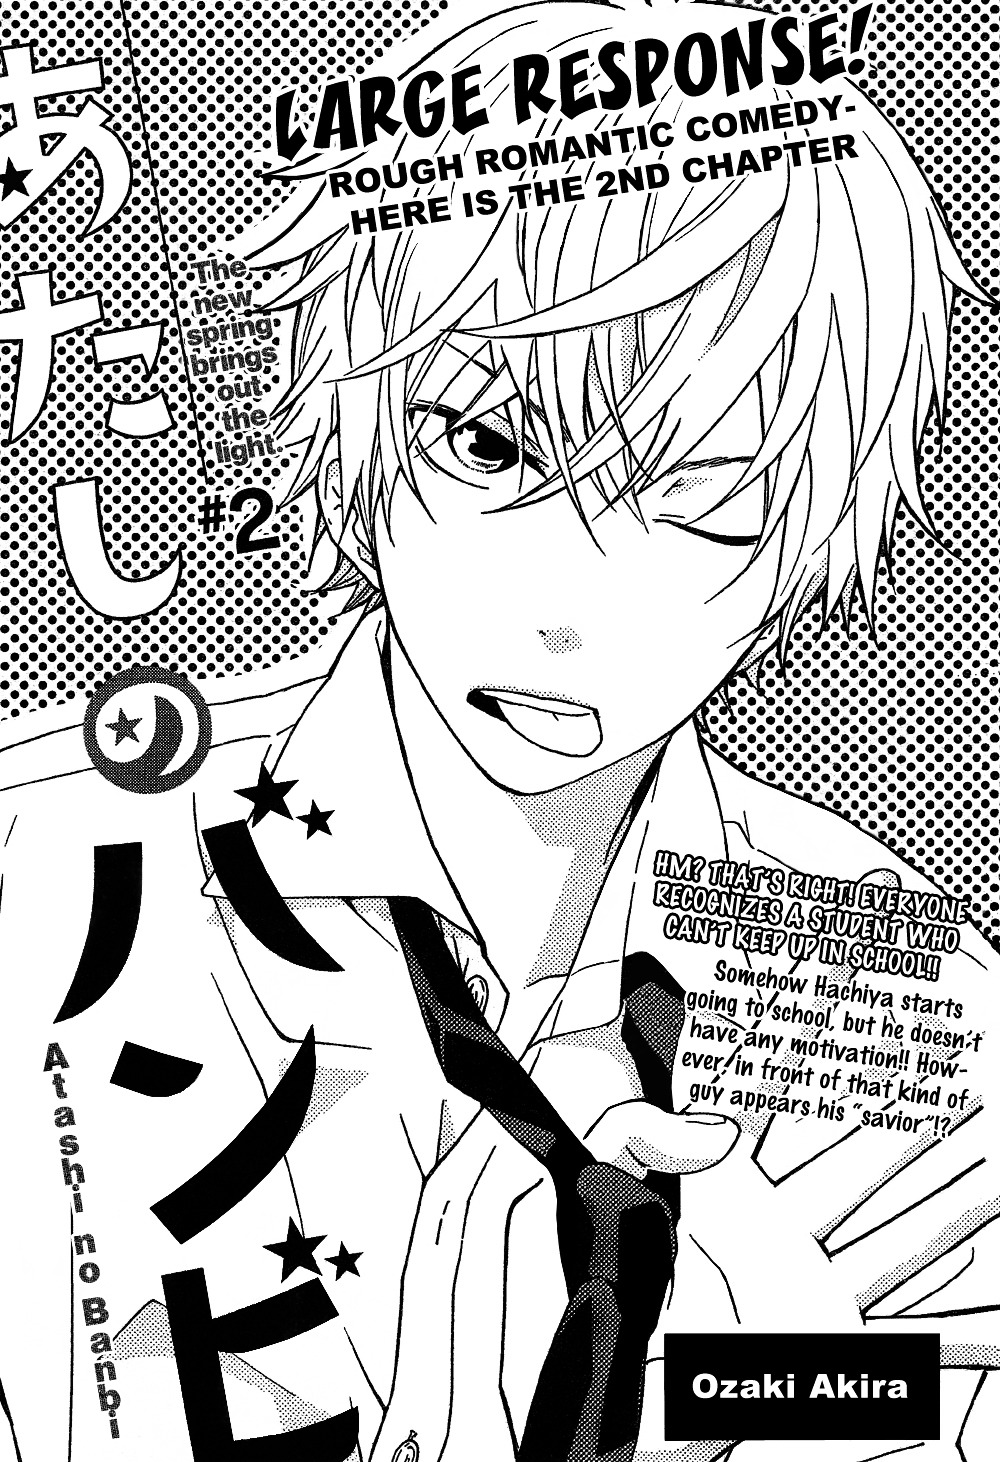 Atashi No Banbi Vol.1 Chapter 2 : The New Spring Brings Out The Light - Picture 2